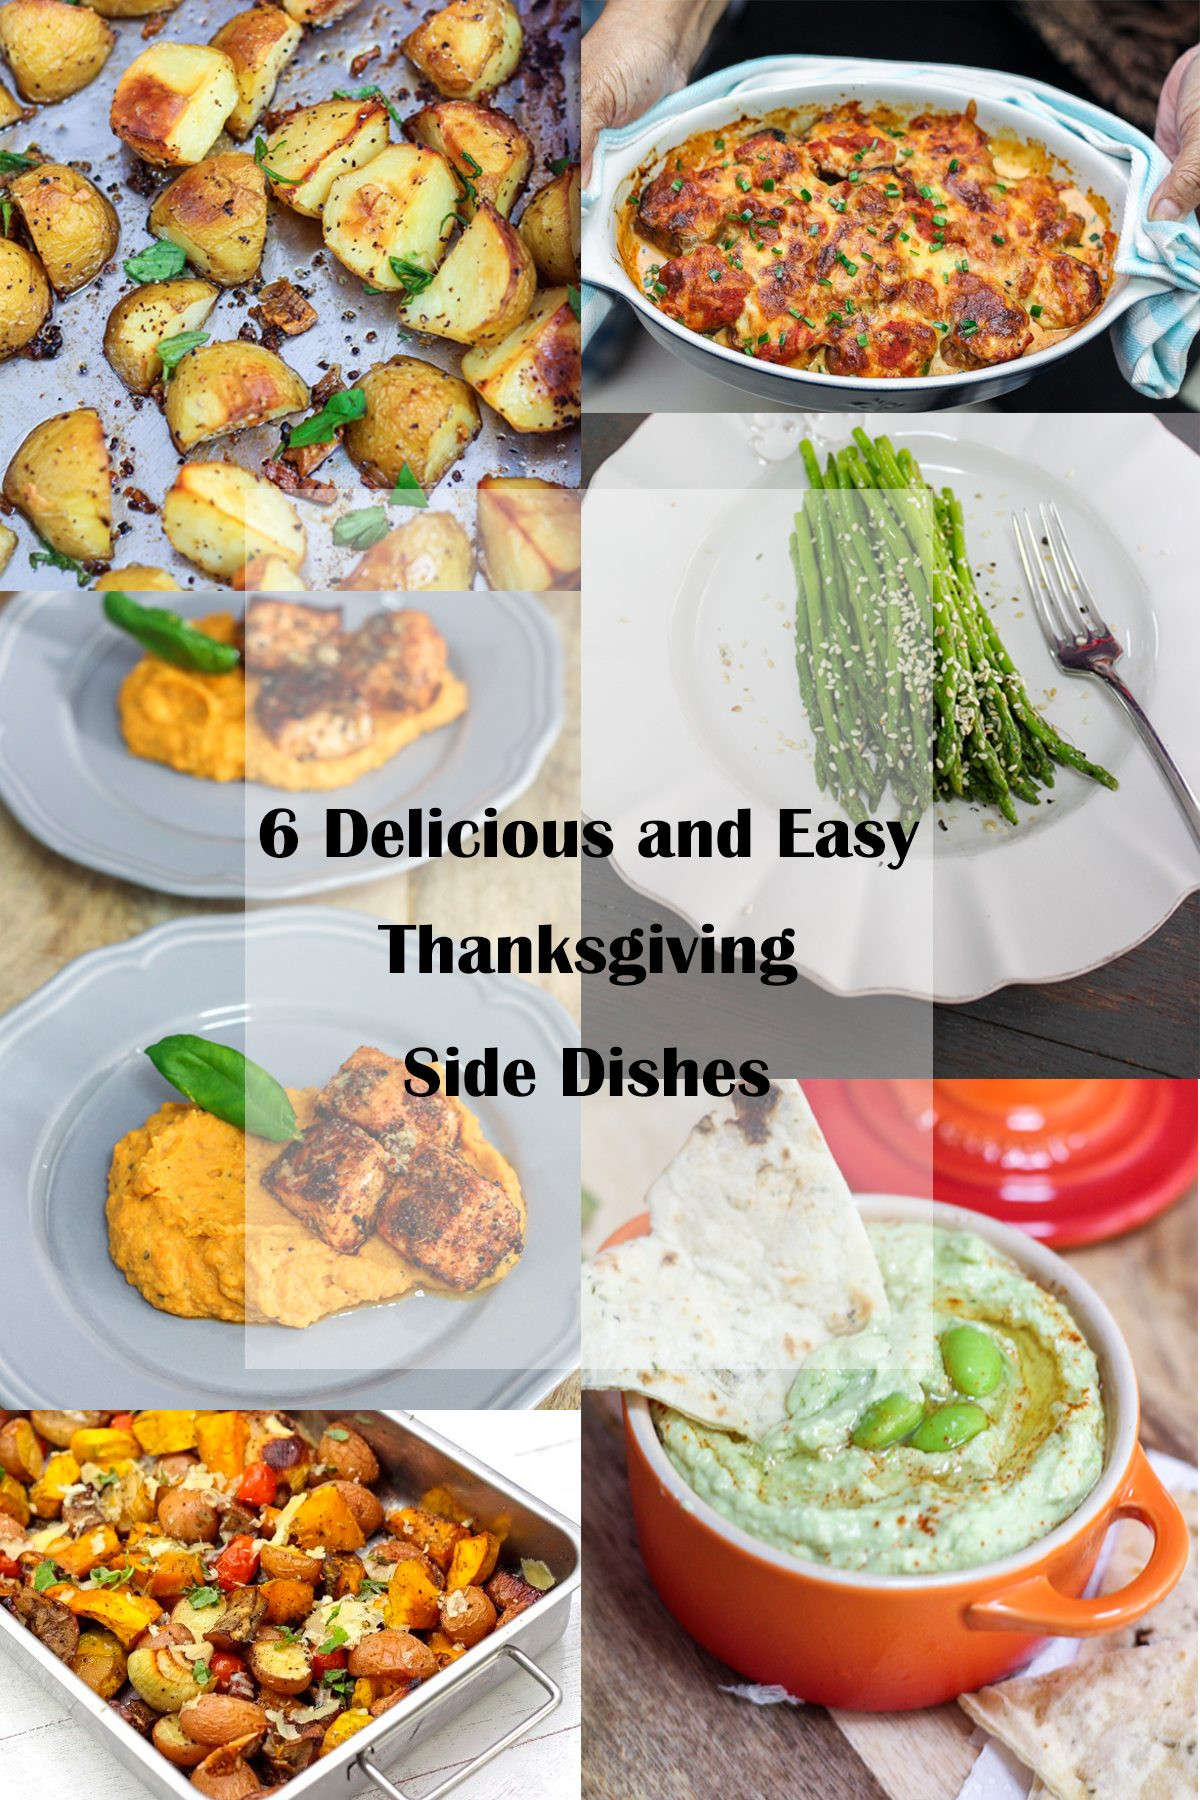 Easy Thanksgiving Food
 6 Delicious and Easy Thanksgiving Side Dishes